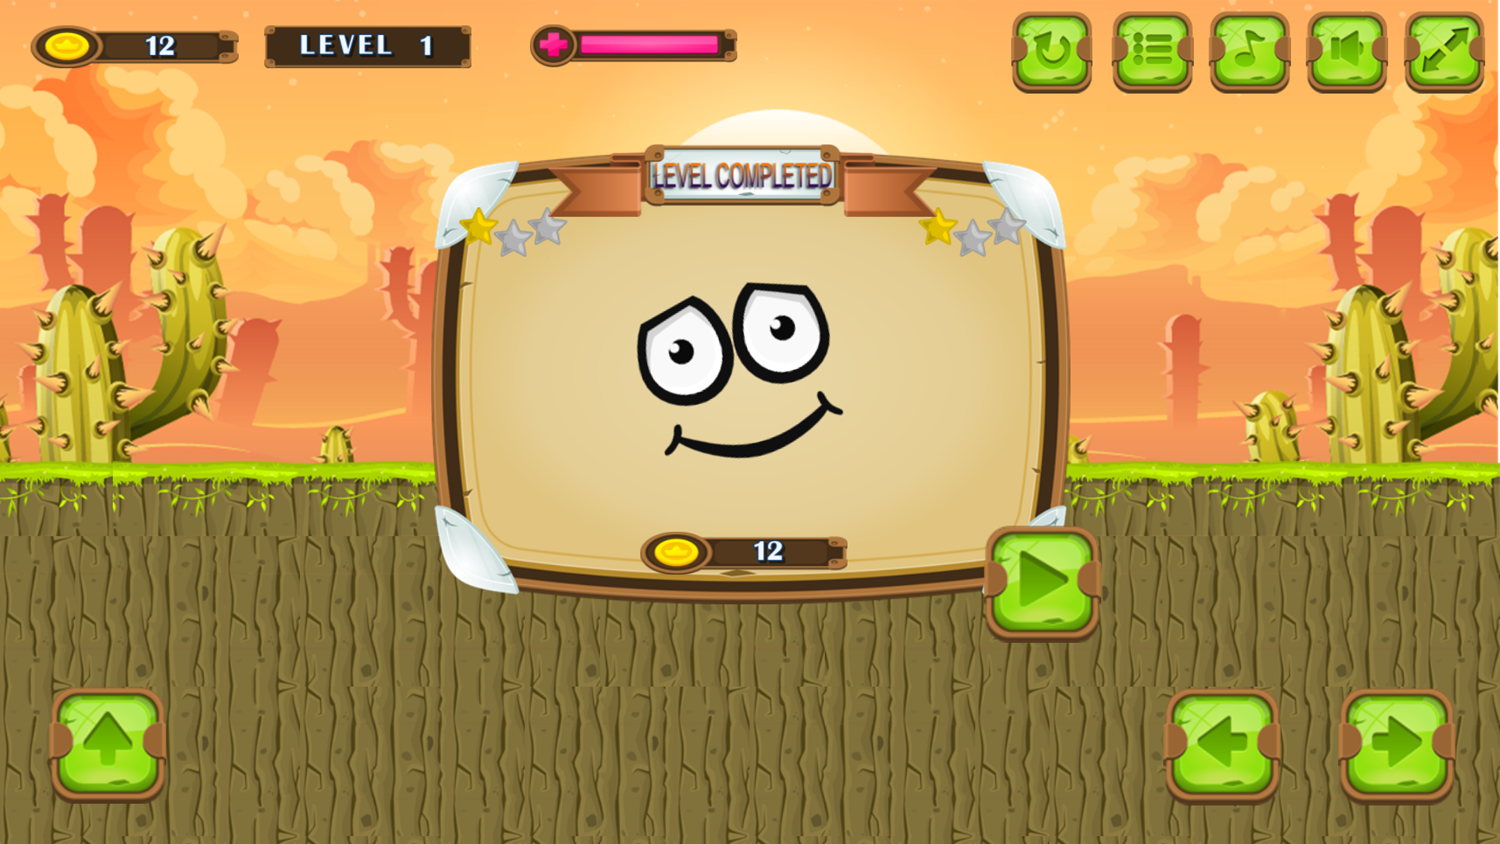 Smiley Ball Game Level Completed Screenshot.